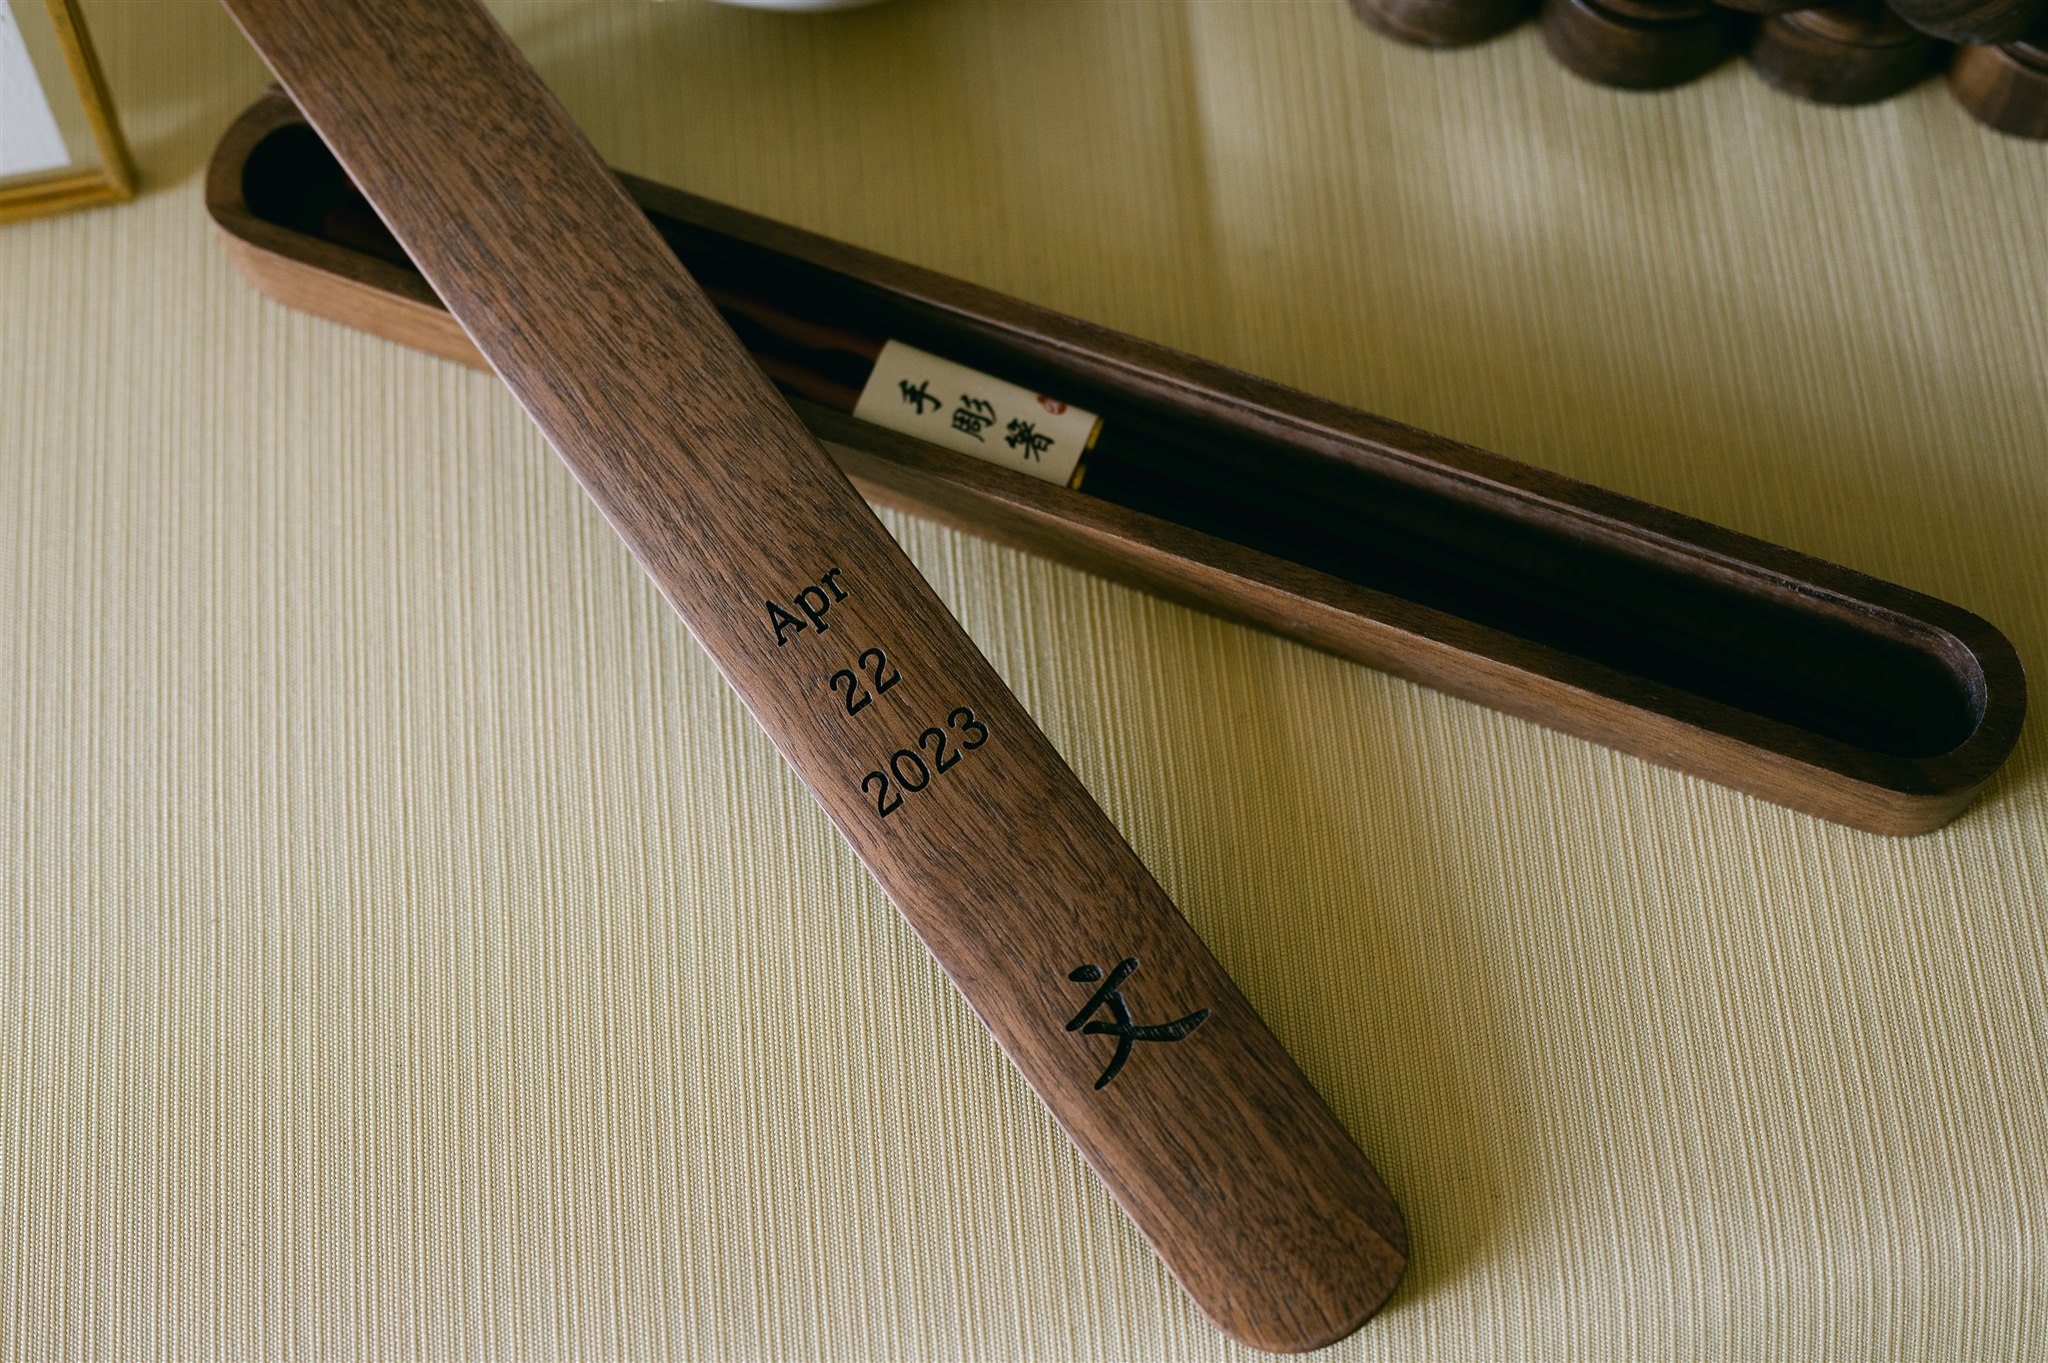 custom wooden chopsticks and chopstick case engraved from japan wedding party favors